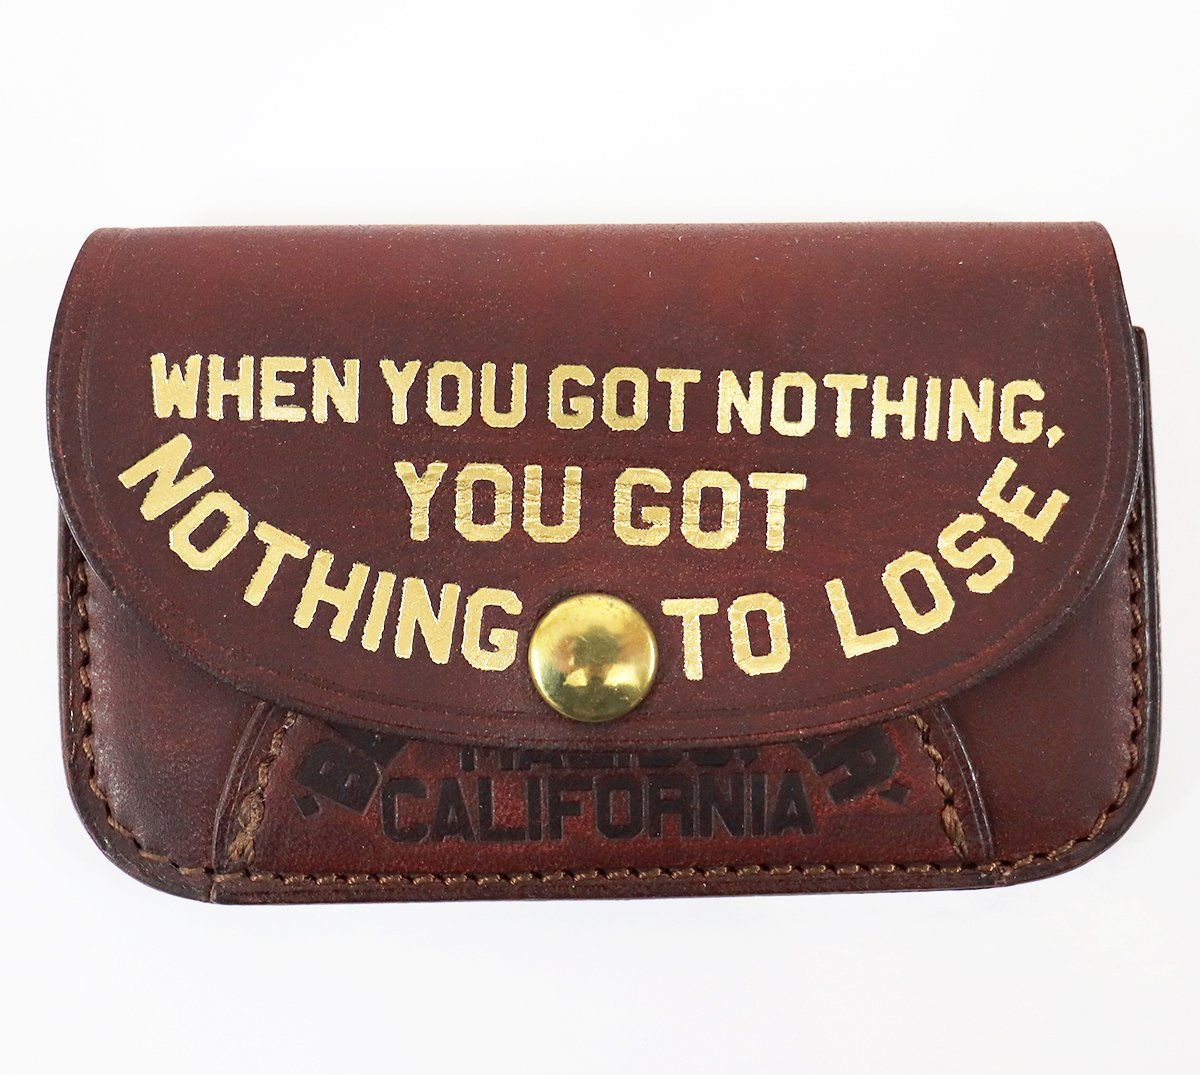 BARNSTORMERS (バーンストーマーズ) Card Case “Nothing To Lose” / カードケース ナッシング・トゥ・ルーズ A16-02 キドニー 未使用品の画像2